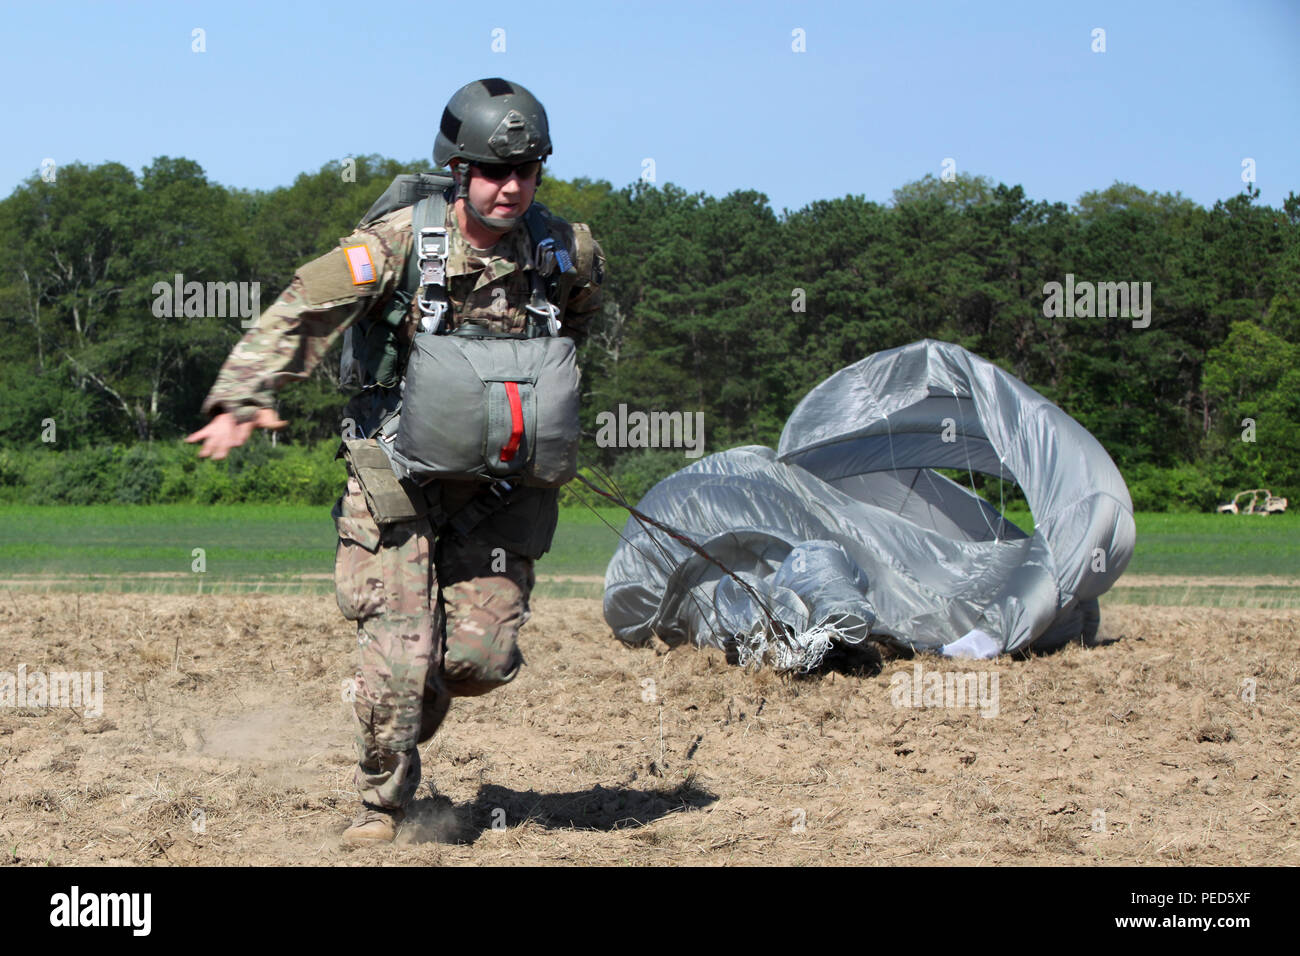 A U.S. Army paratrooper runs to the 'X' on the drop zone during Leapfest in West Kingston, R.I., Aug. 1, 2015. Leapfest is an International parachute competition hosted by the 56th Troop Command, Rhode Island National Guard to promote high level technical training and esprit de corps within the International Airborne community. (U.S. Army Photo by Spc. Joseph Cathey/Released) Stock Photo